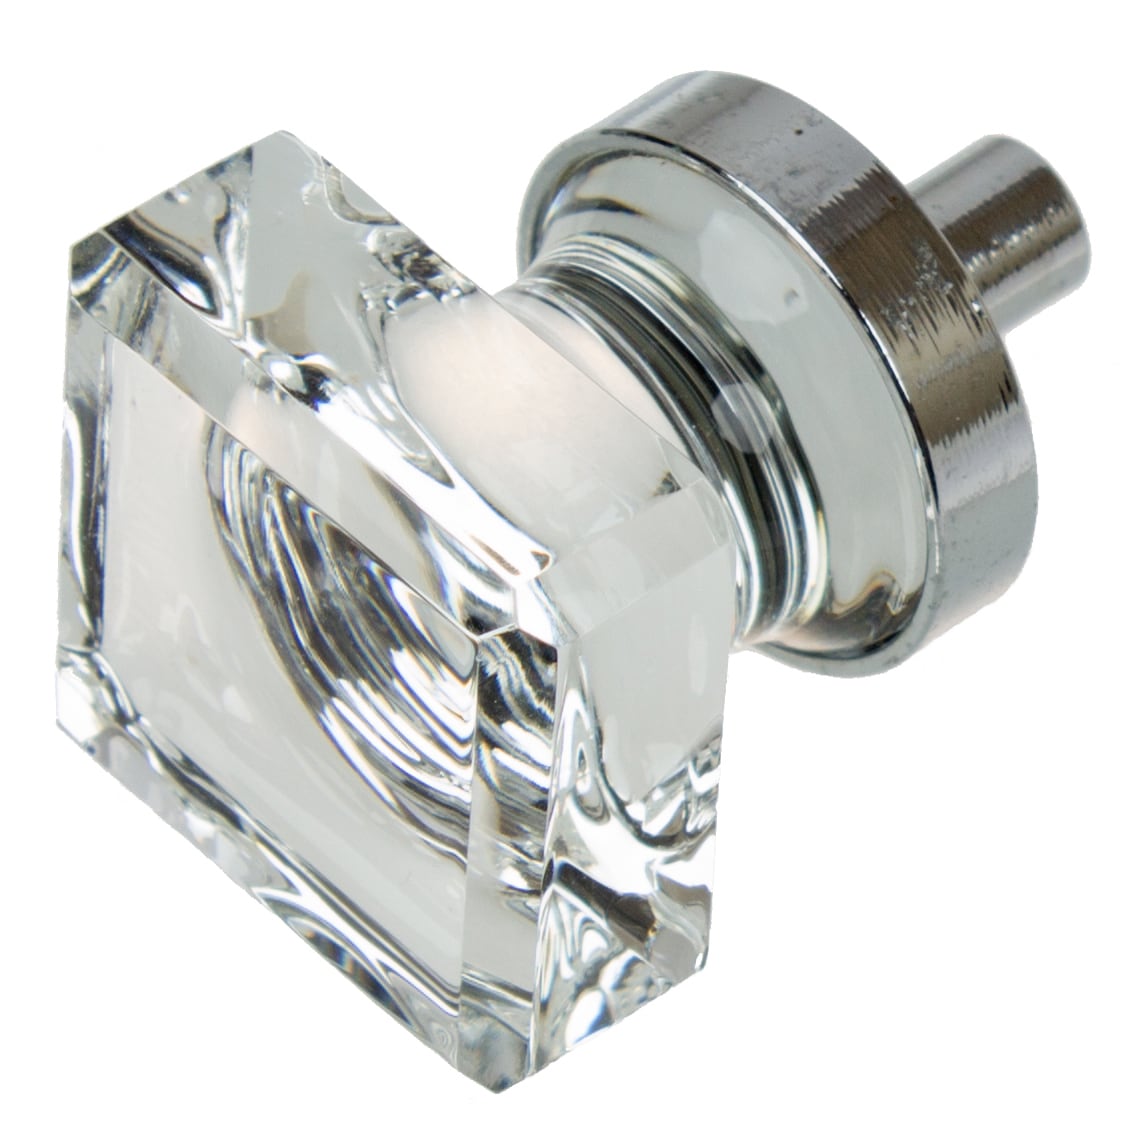 Shop Gliderite 1 Inch Polished Chrome Square Glass Cabinet Knobs